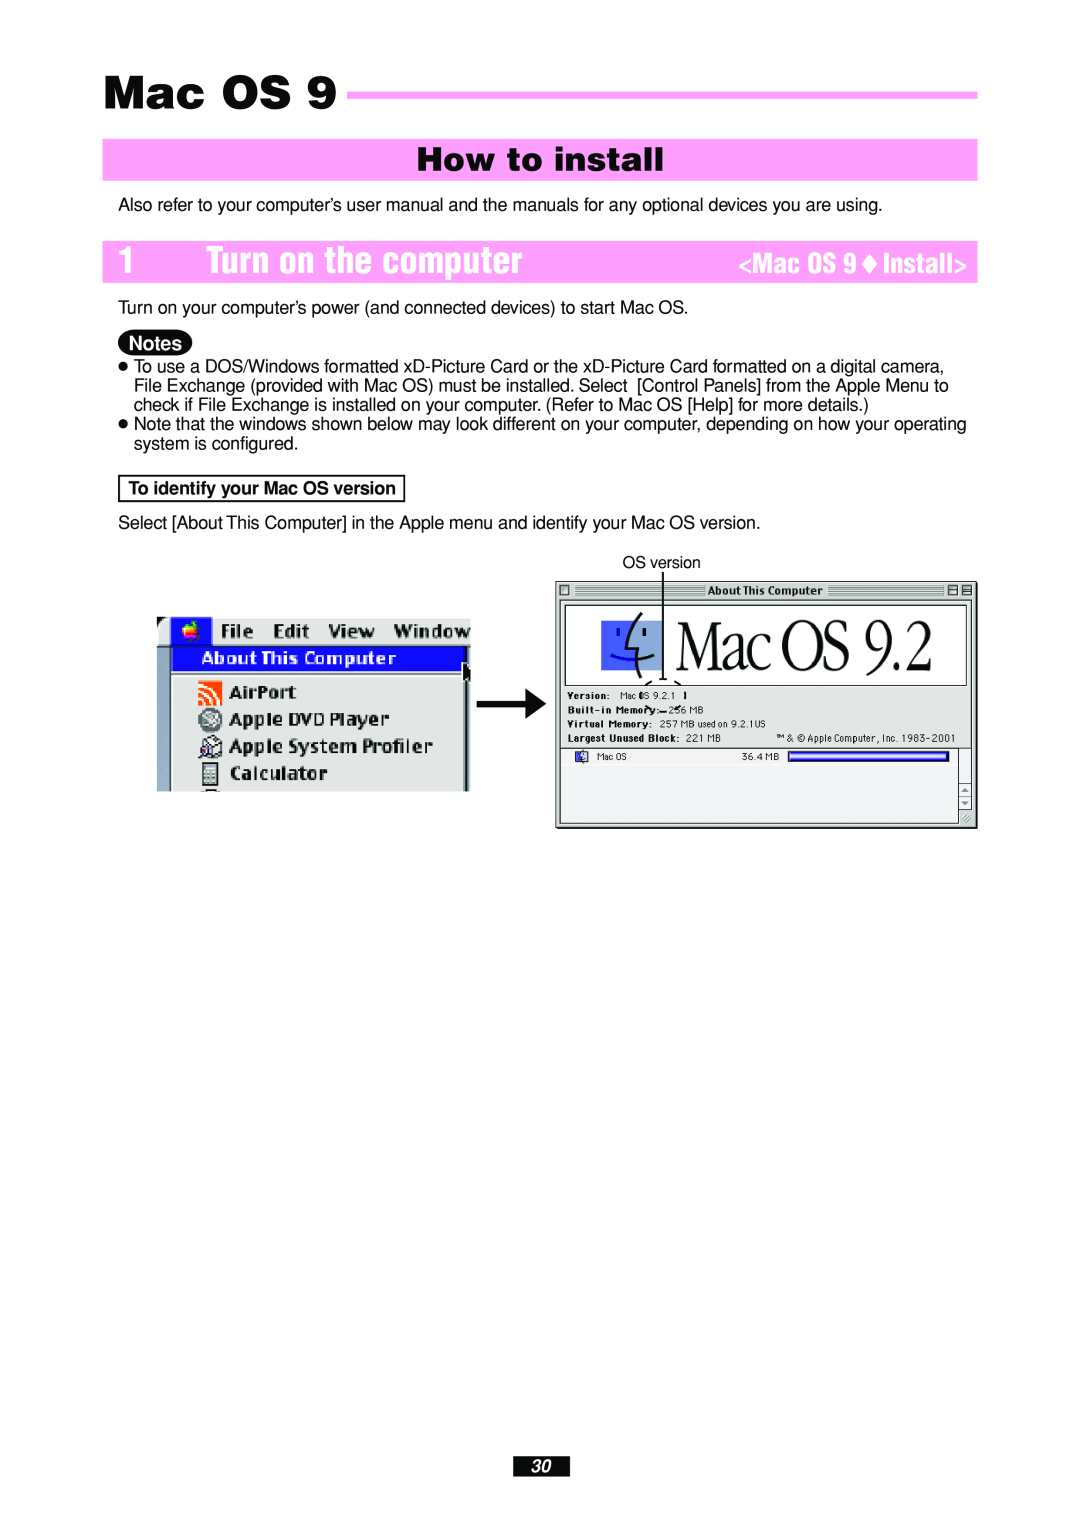 Olympus MAUSB-100 manual Mac OS 9 Install, Turn on the computer, How to install, To identify your Mac OS version 